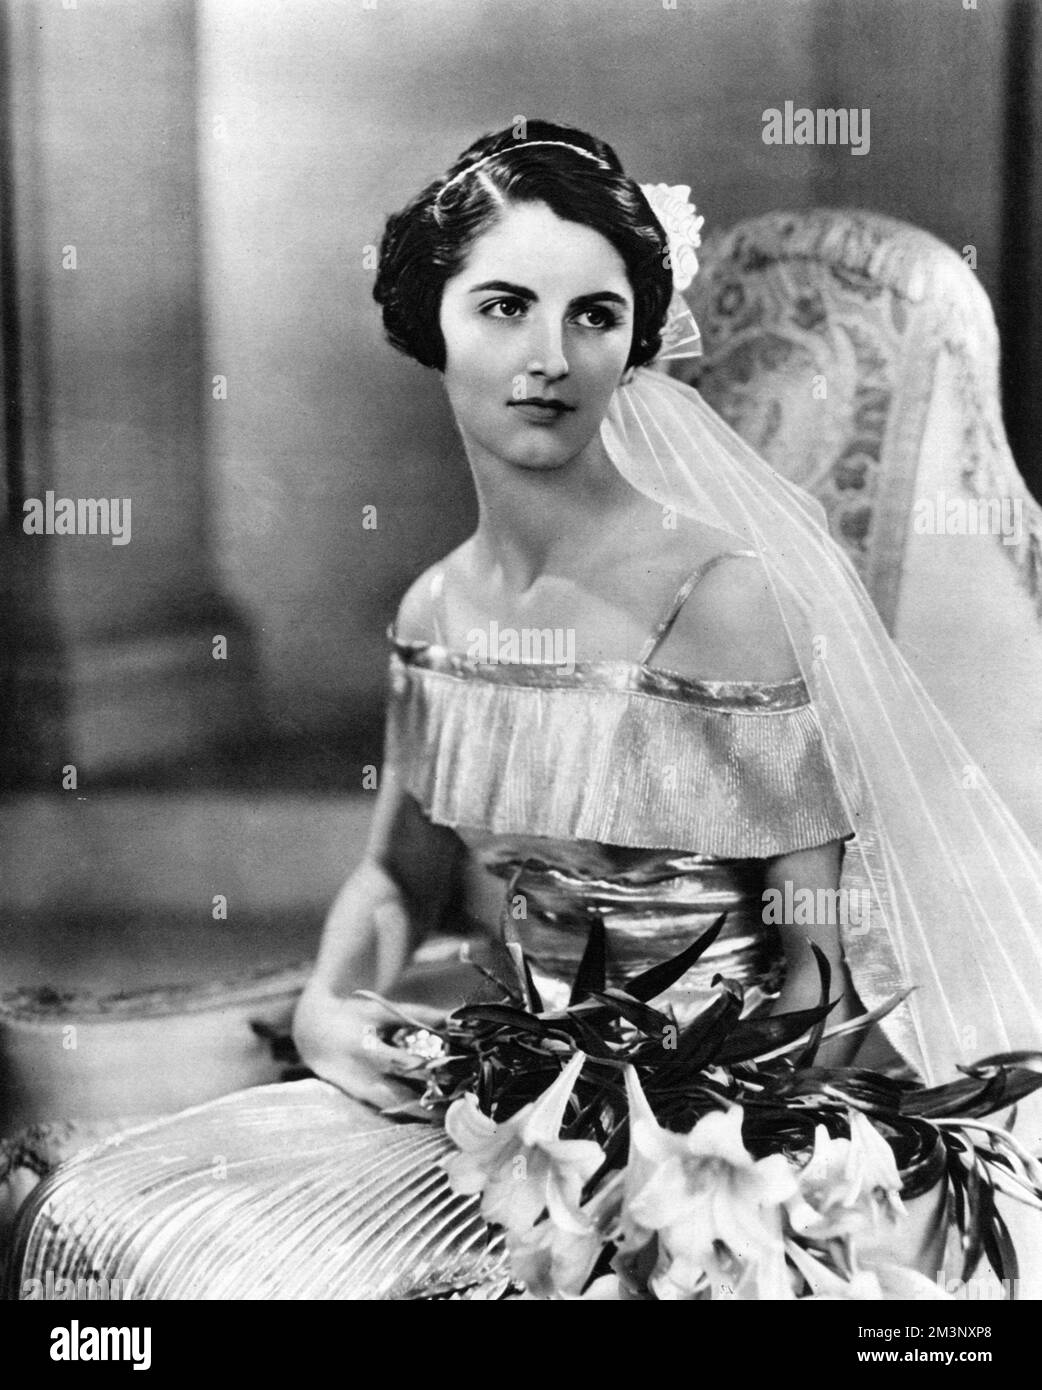 Lady Gloria Vaughan, daughter of the Earl and Countess of Lisburne, 'one of the most important debutantes of the year' according to The Sketch magazine, pictured in the dress she wore to be presented at the first court of the Season on 15 May 1934.     Date: 1934 Stock Photo